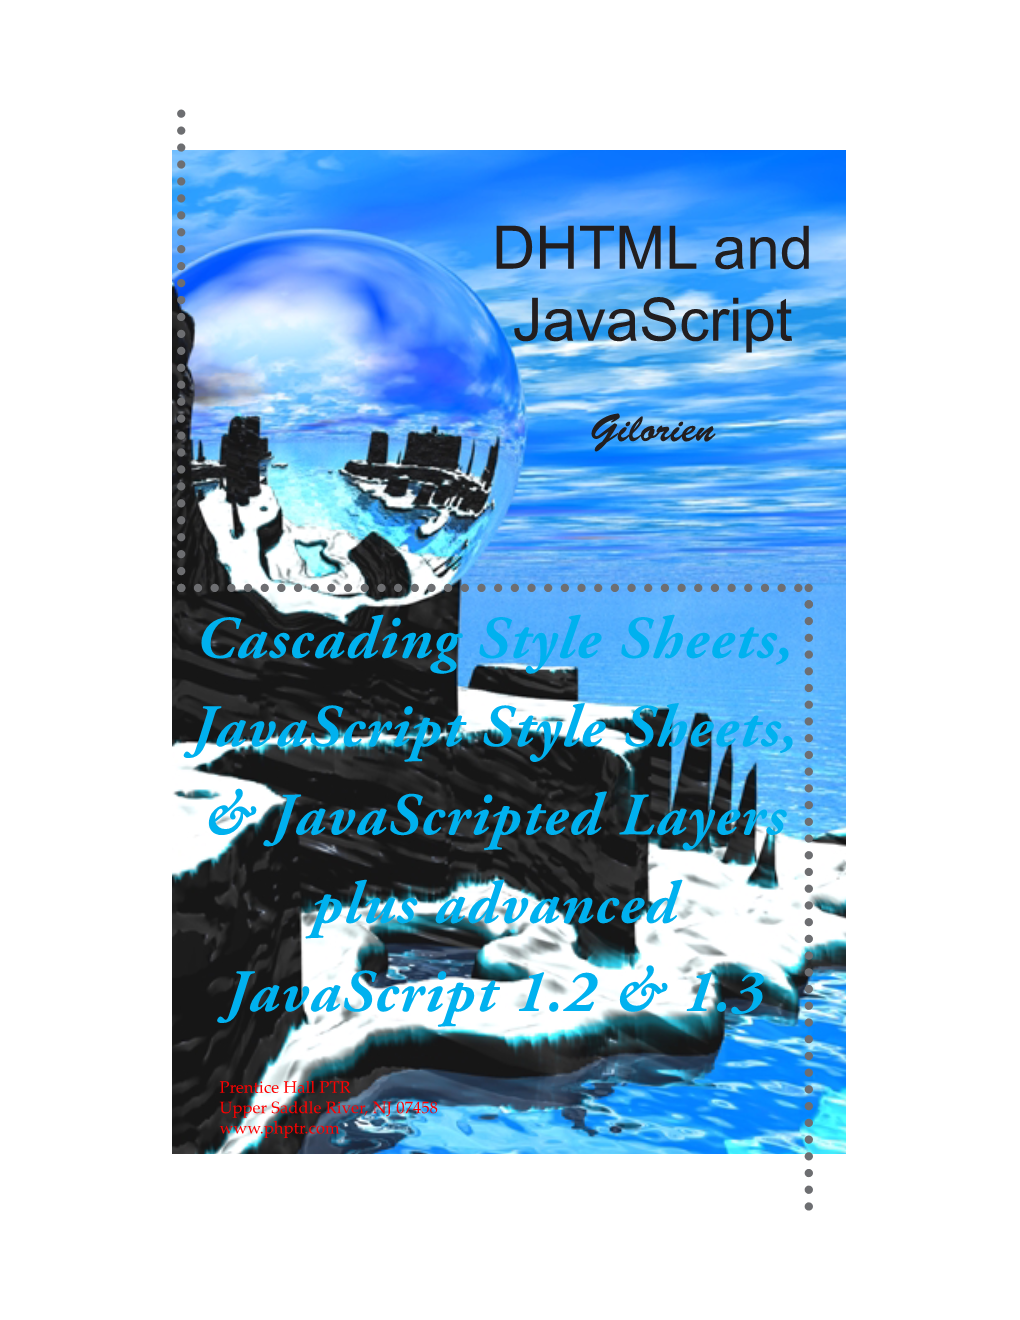 Cascading Style Sheets, Javascript Style Sheets, & Javascripted Layers Plus Advanced Javascript 1.2 & 1.3